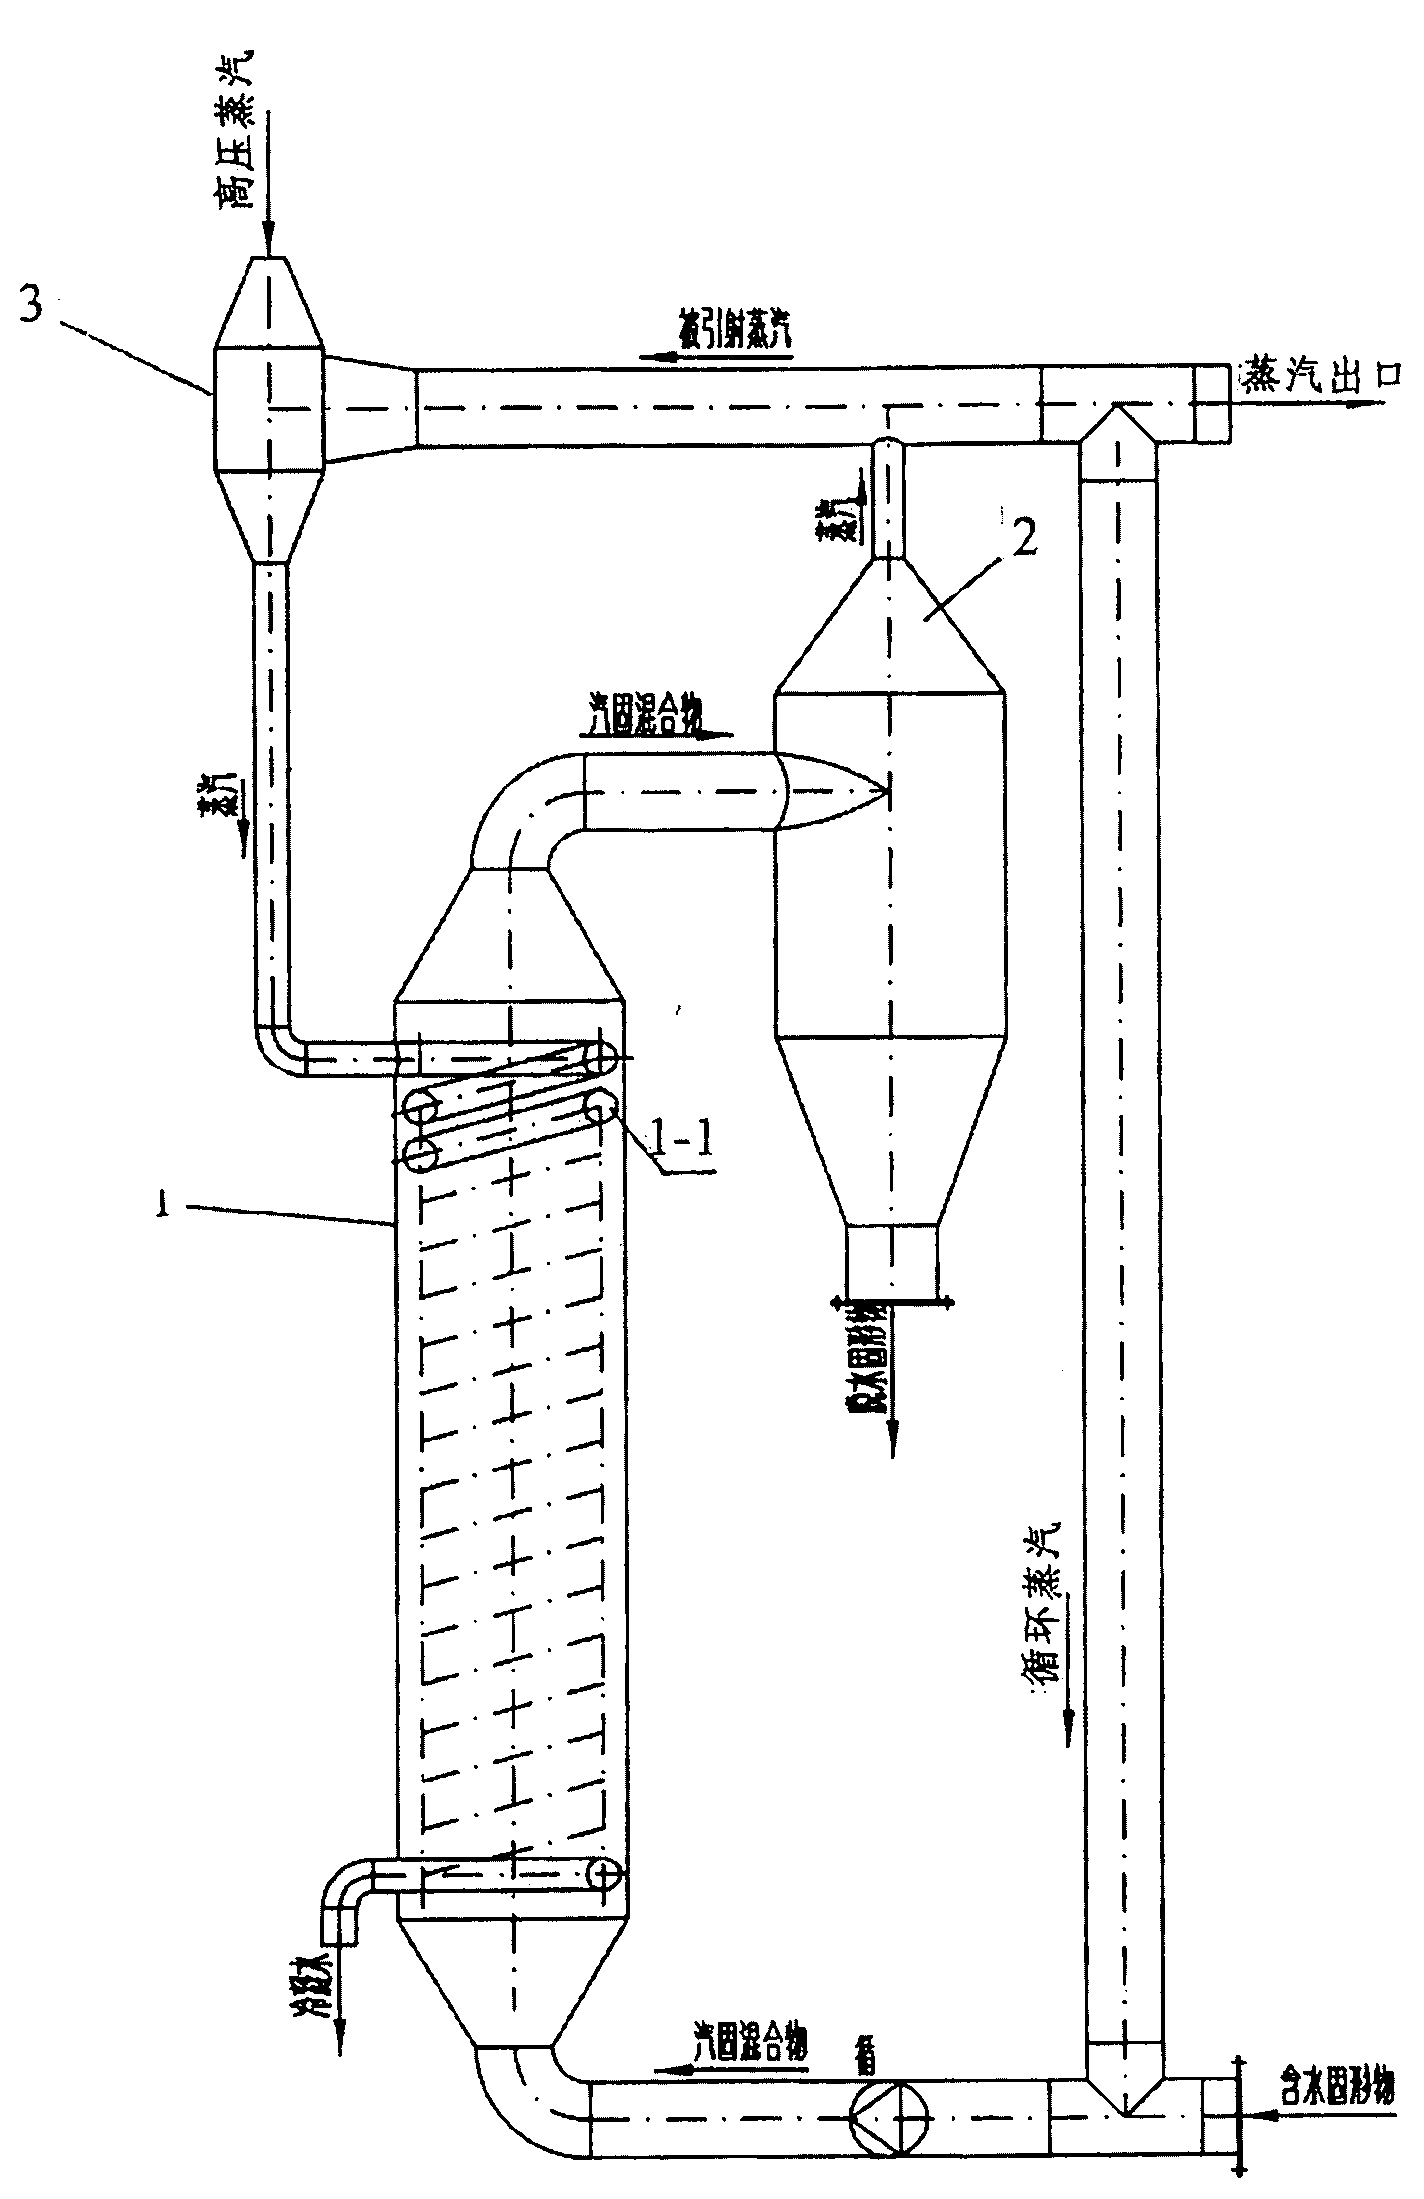 Drying dehydration steam-recycle process and device for solid containing water